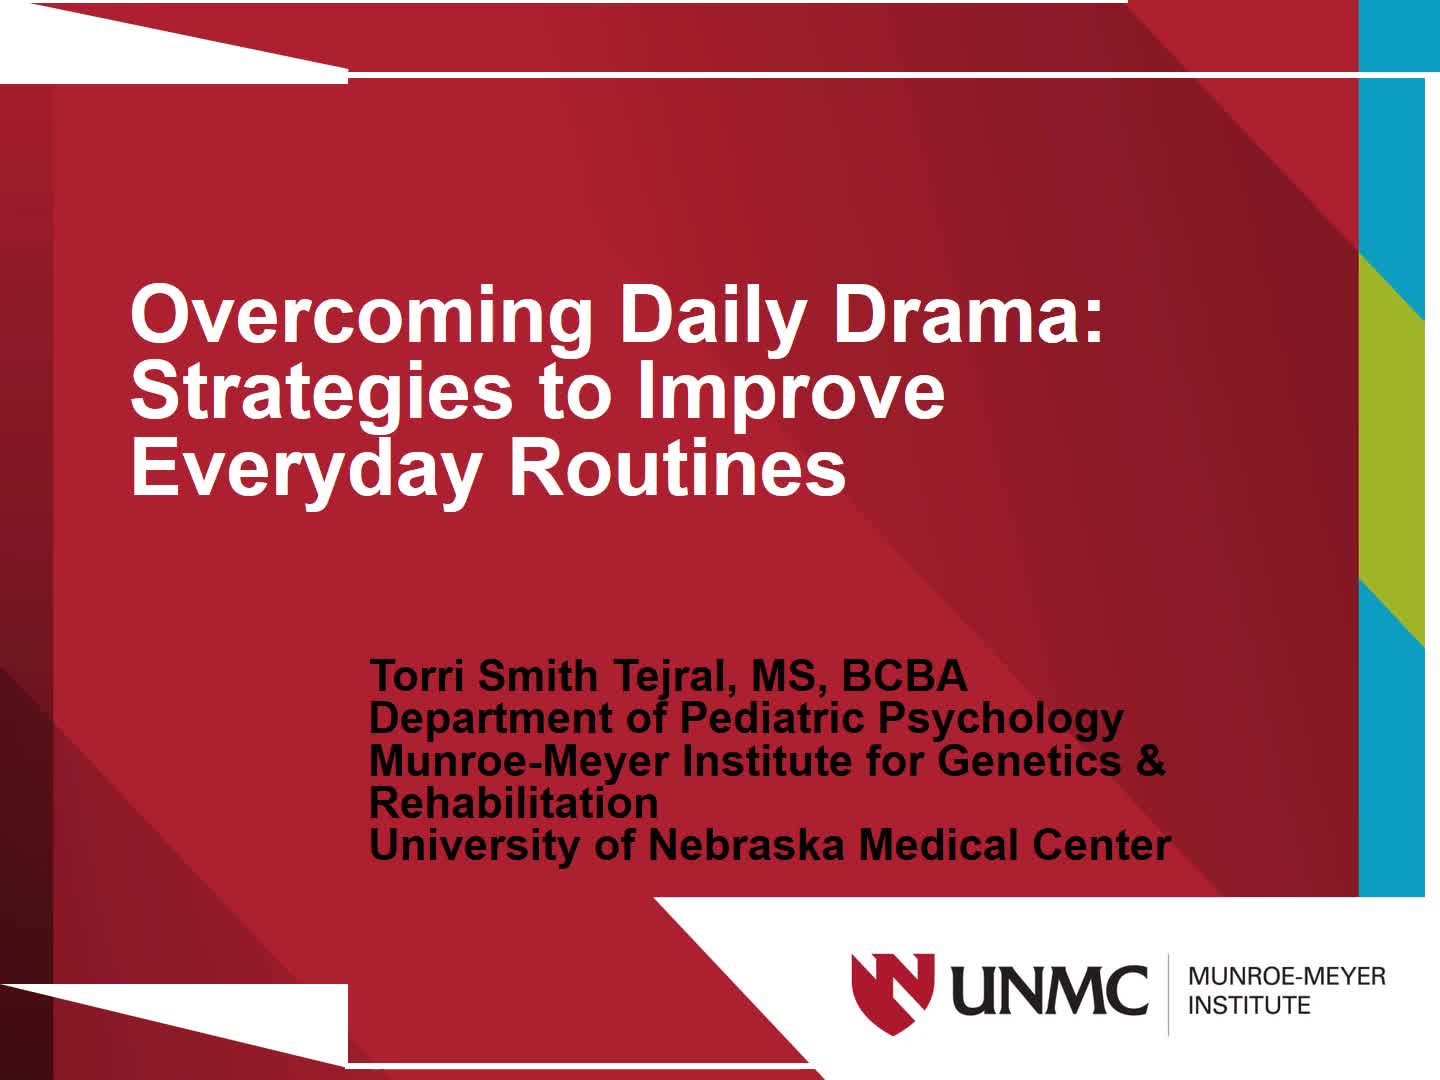 Overcoming Daily Drama: Strategies to Improve Everyday Routines